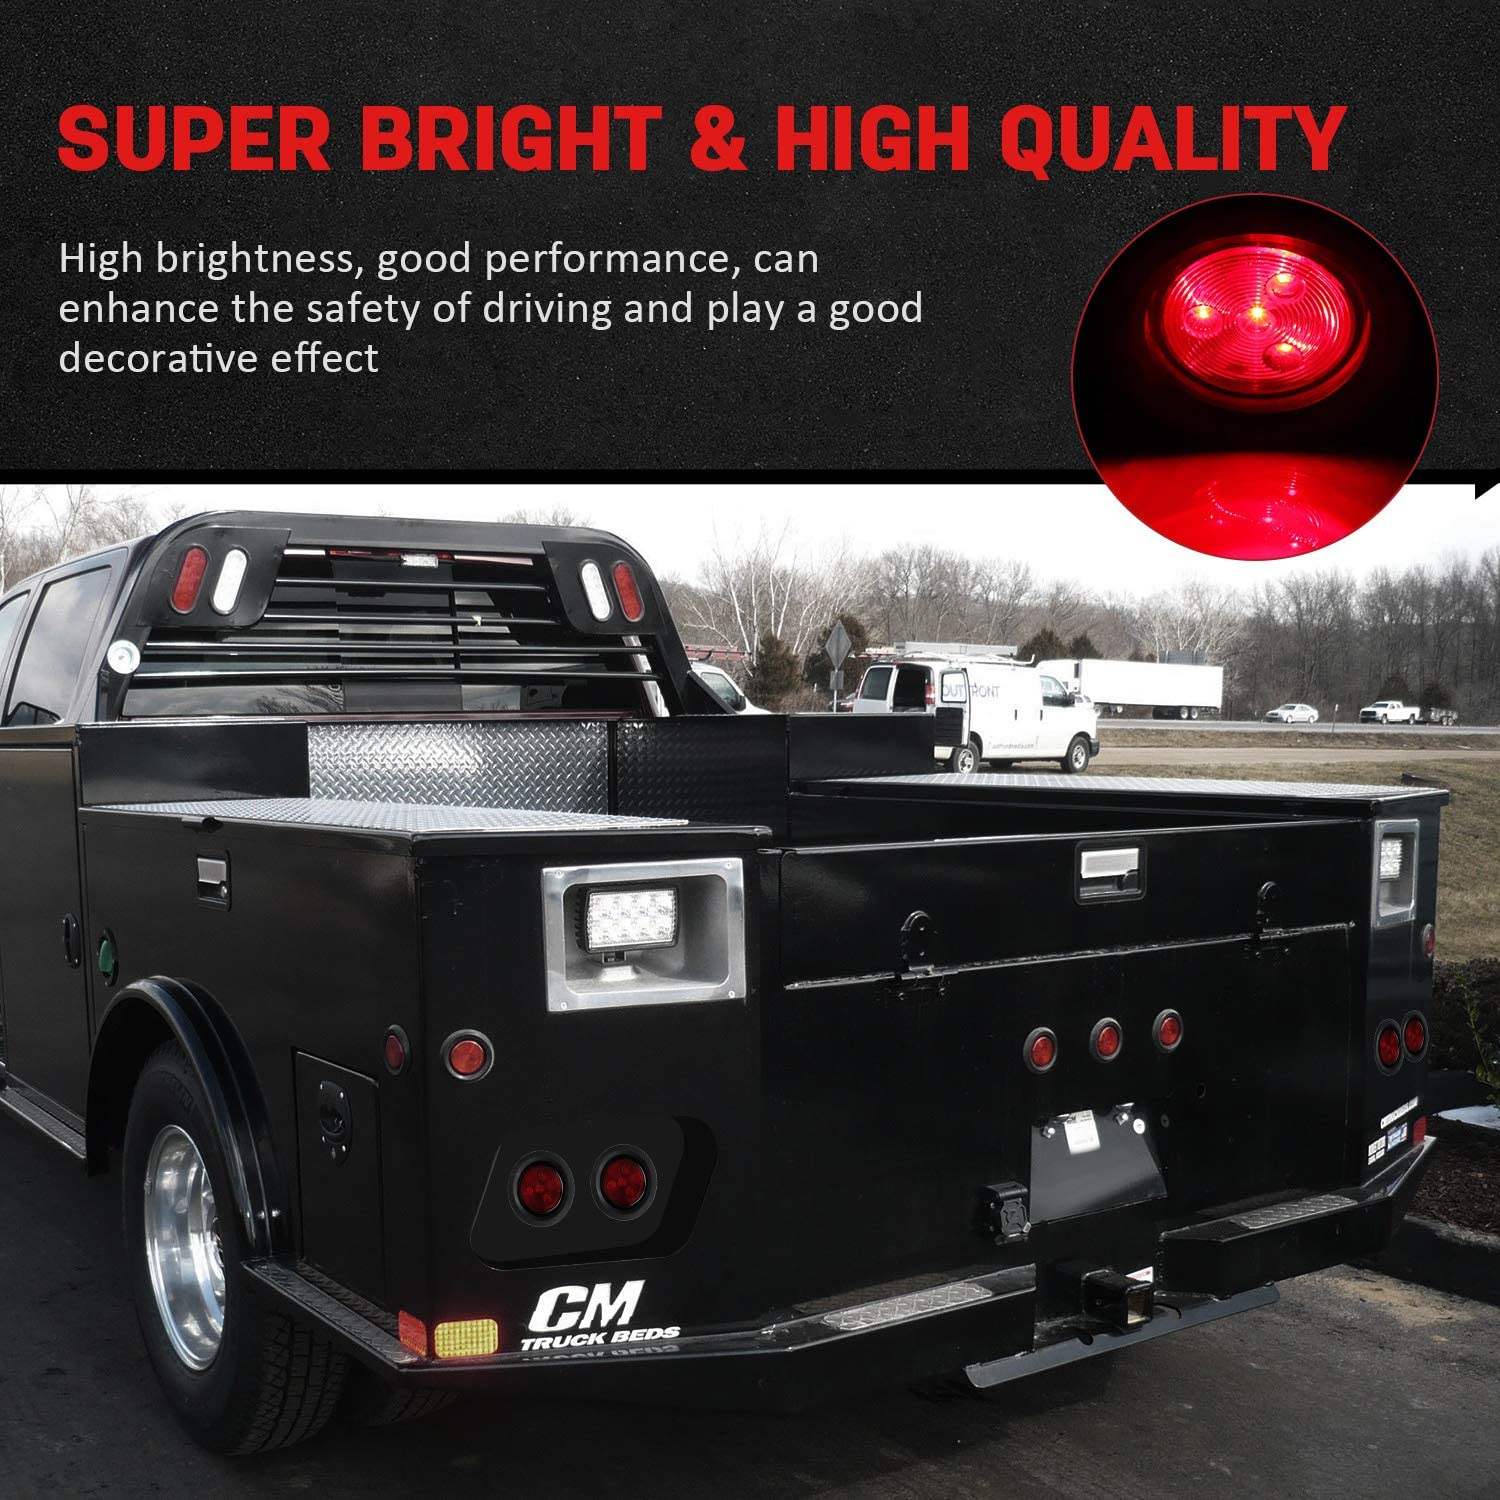 4PCS 2.5” Red Round Side Marker Light Tail Lamps 4LED With Rubber Grommet for Truck Trailer Pickup